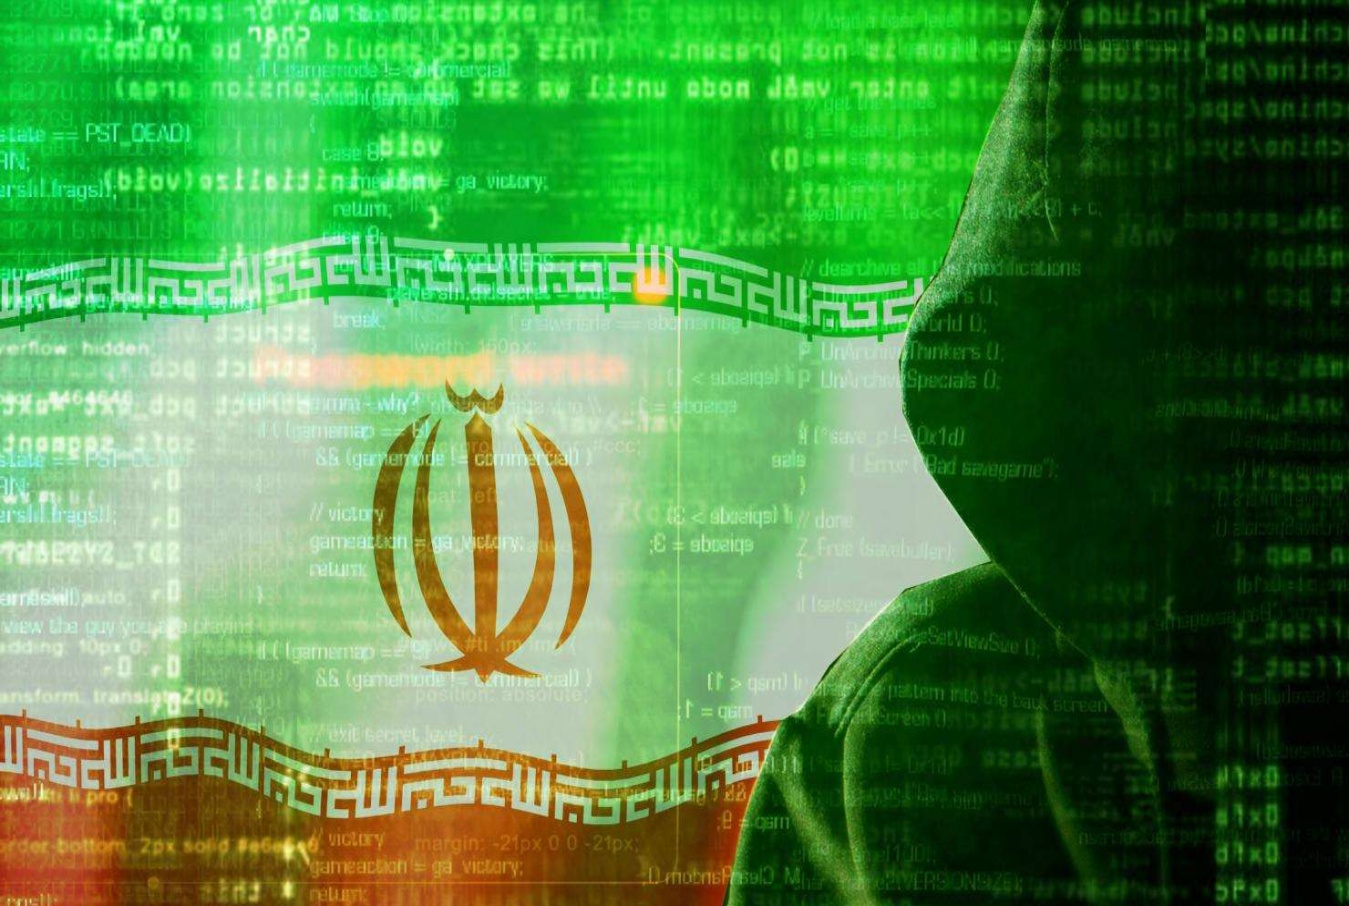 Two Iranian Men Indicted for Deploying Ransomware to Extort Hospitals, Municipalities, and Public Institutions, Causing Over $30 Million in Losses